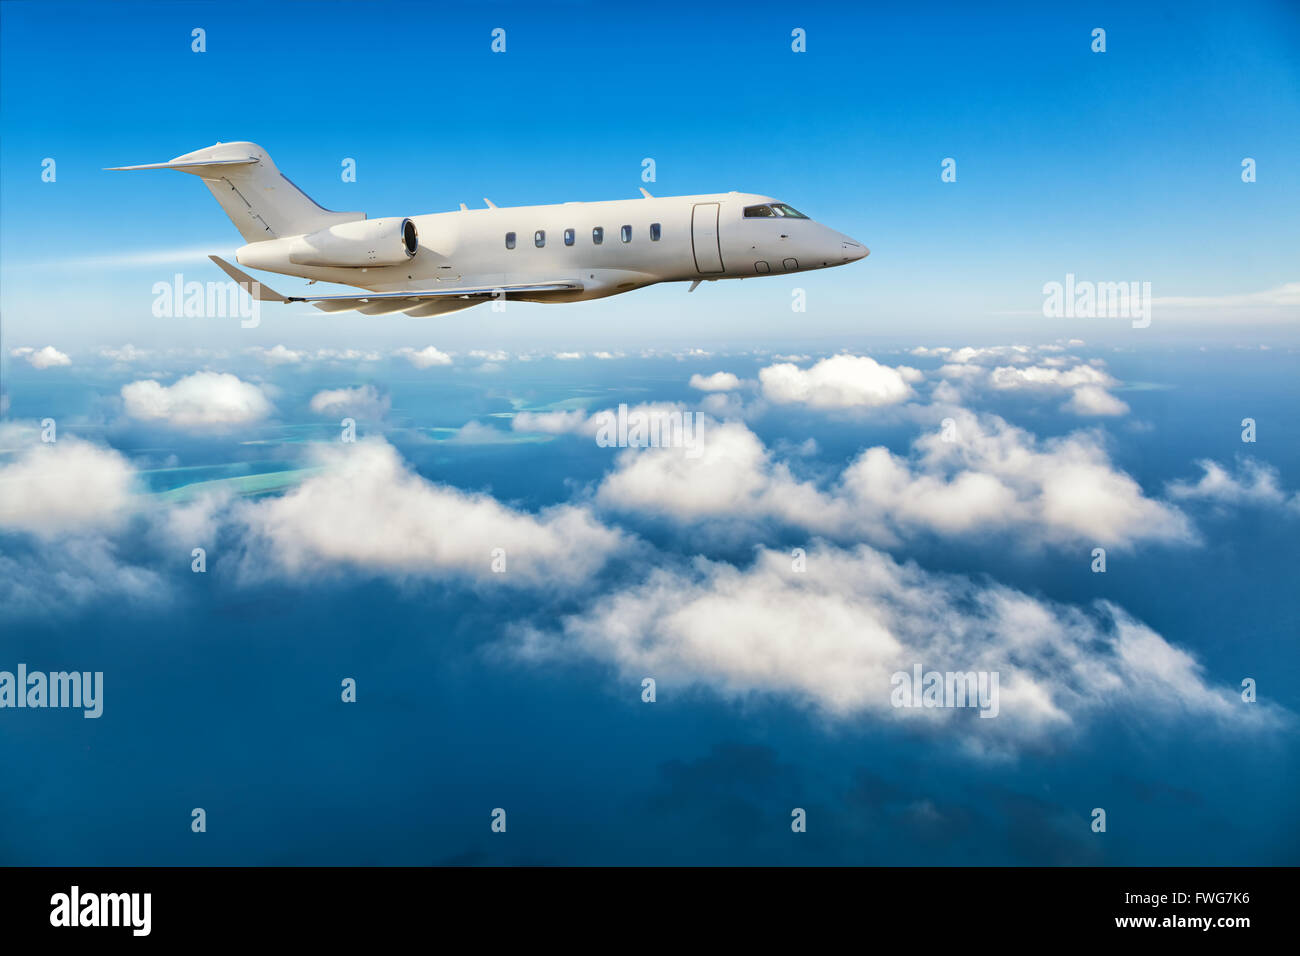 Luxury private jet plane flying above clouds in day light Stock Photo